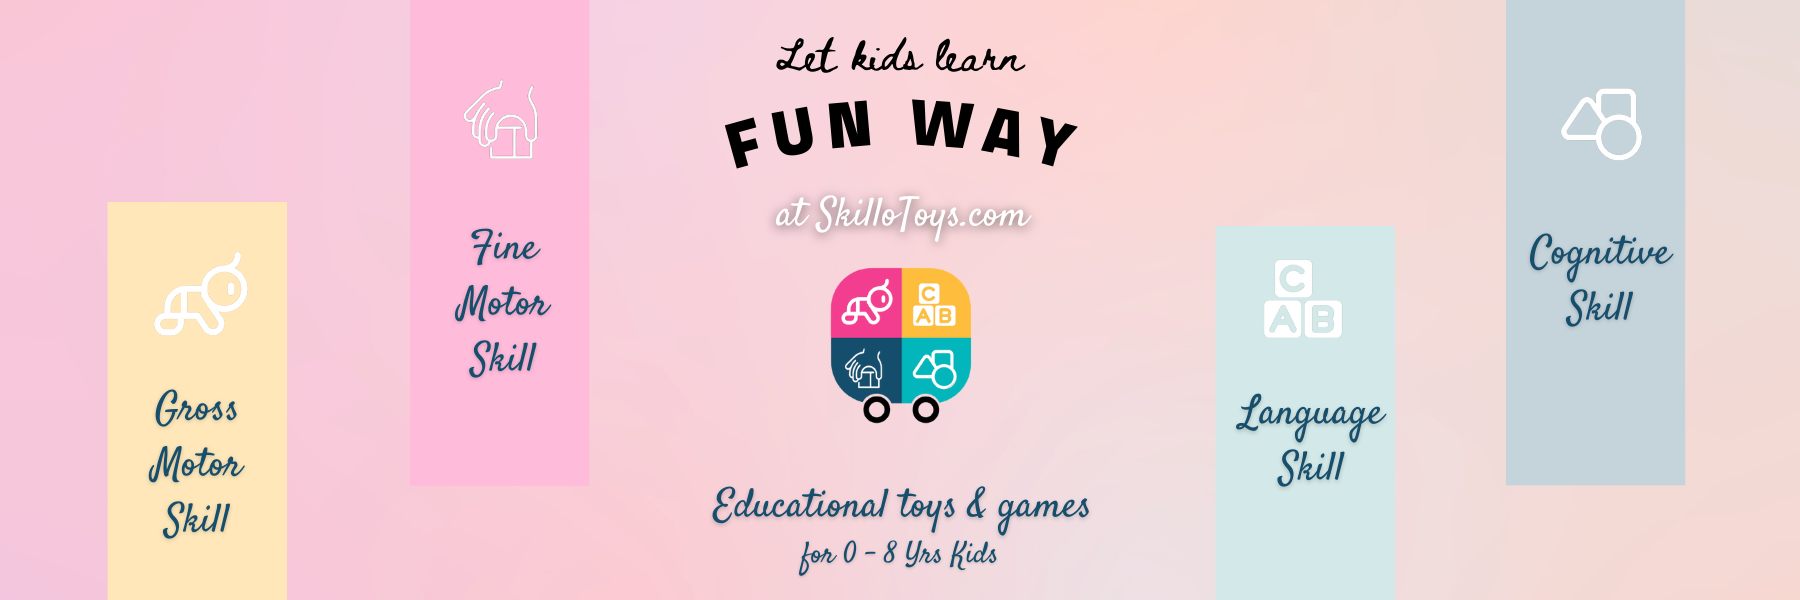 Let Kids Learn Fun Way - SkilloToys.com